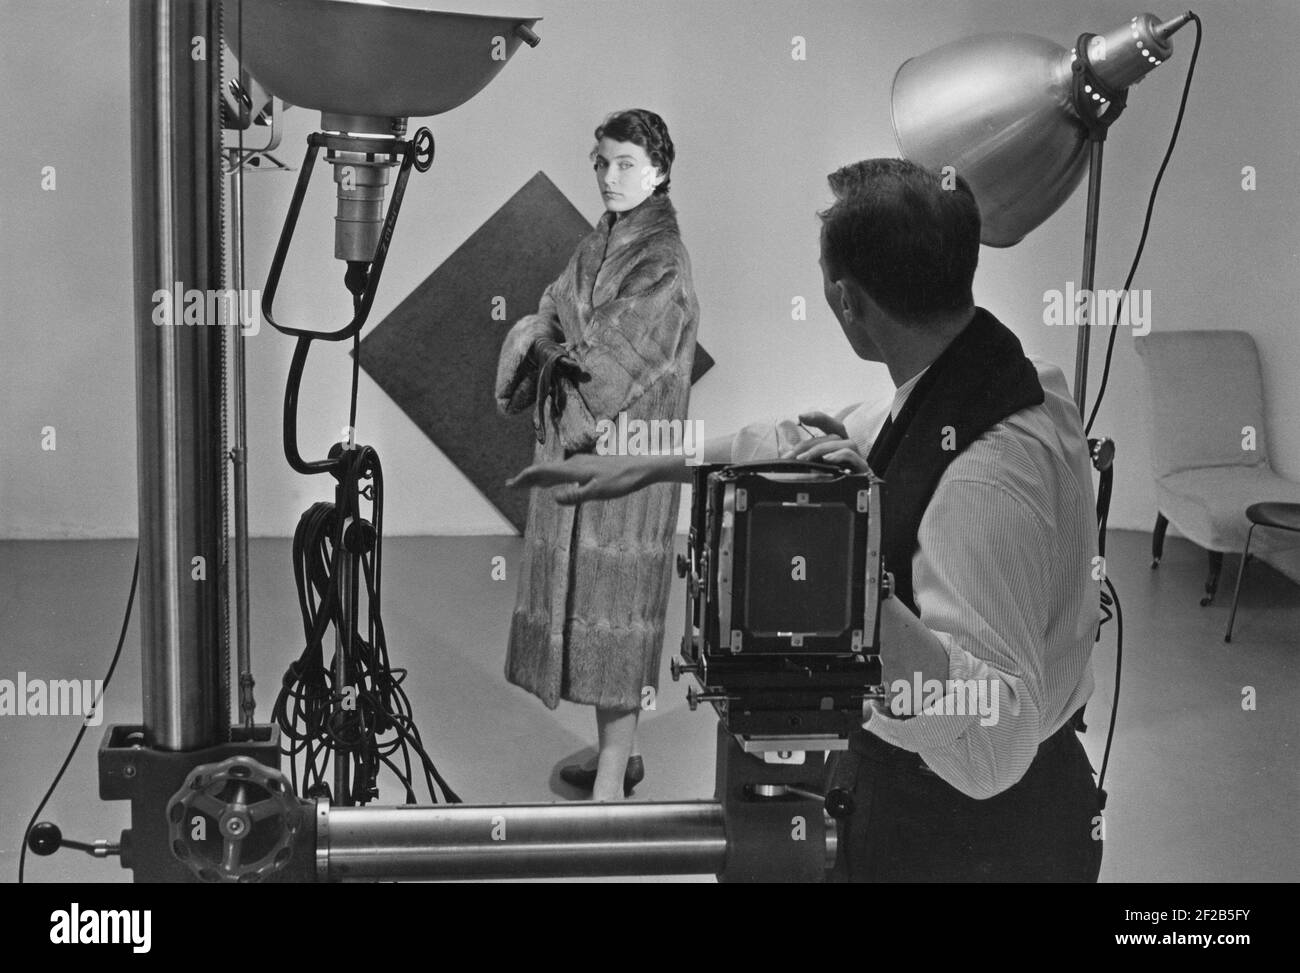 1950s fashion photographer and model. A young woman is dressed up the 1950s fashionable fur coat and is being instructed by the photographer by the camera. Lights and background is arranged. Sweden august 1957 Stock Photo